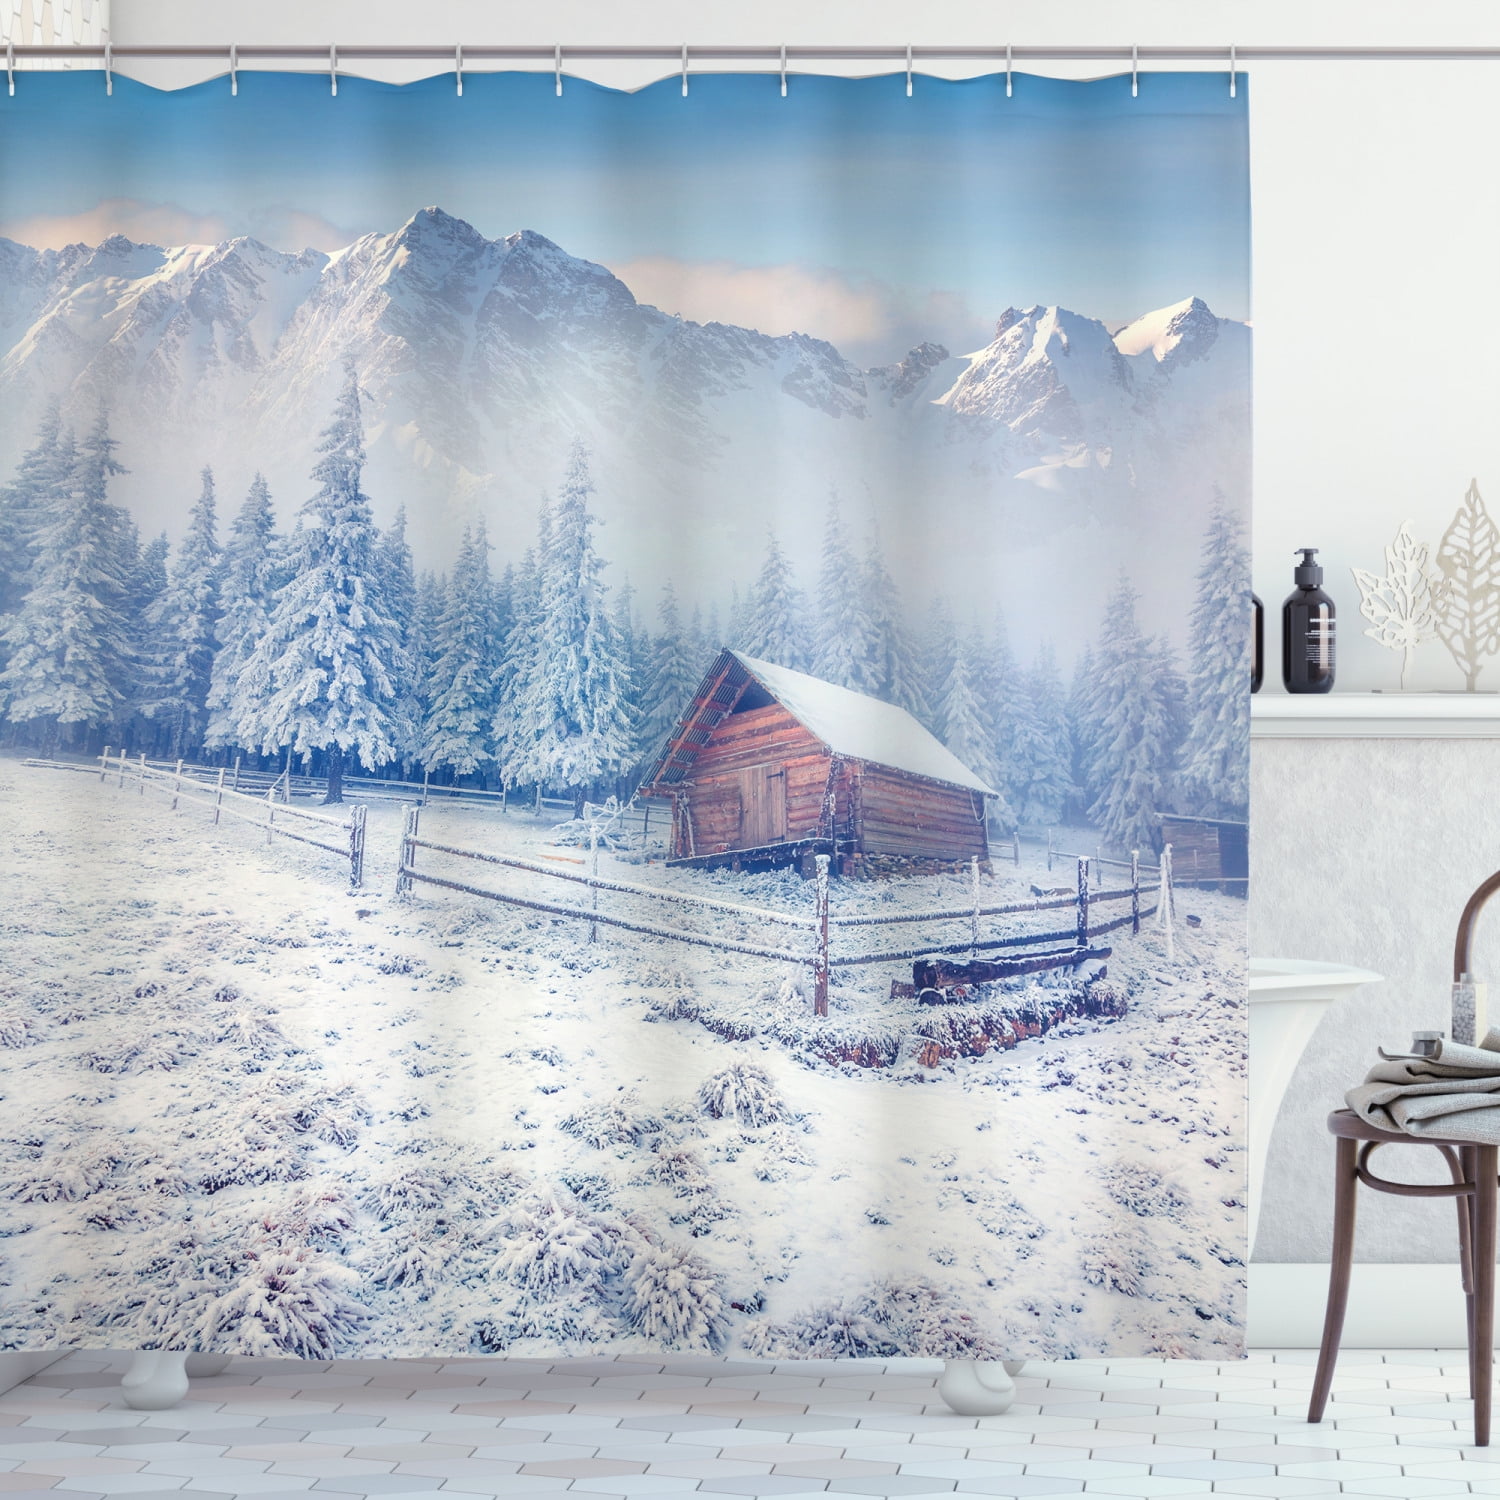 Winter Snow Forest Wild Wolves Shower Curtain Sets For Bathroom Decor w/ Hooks 